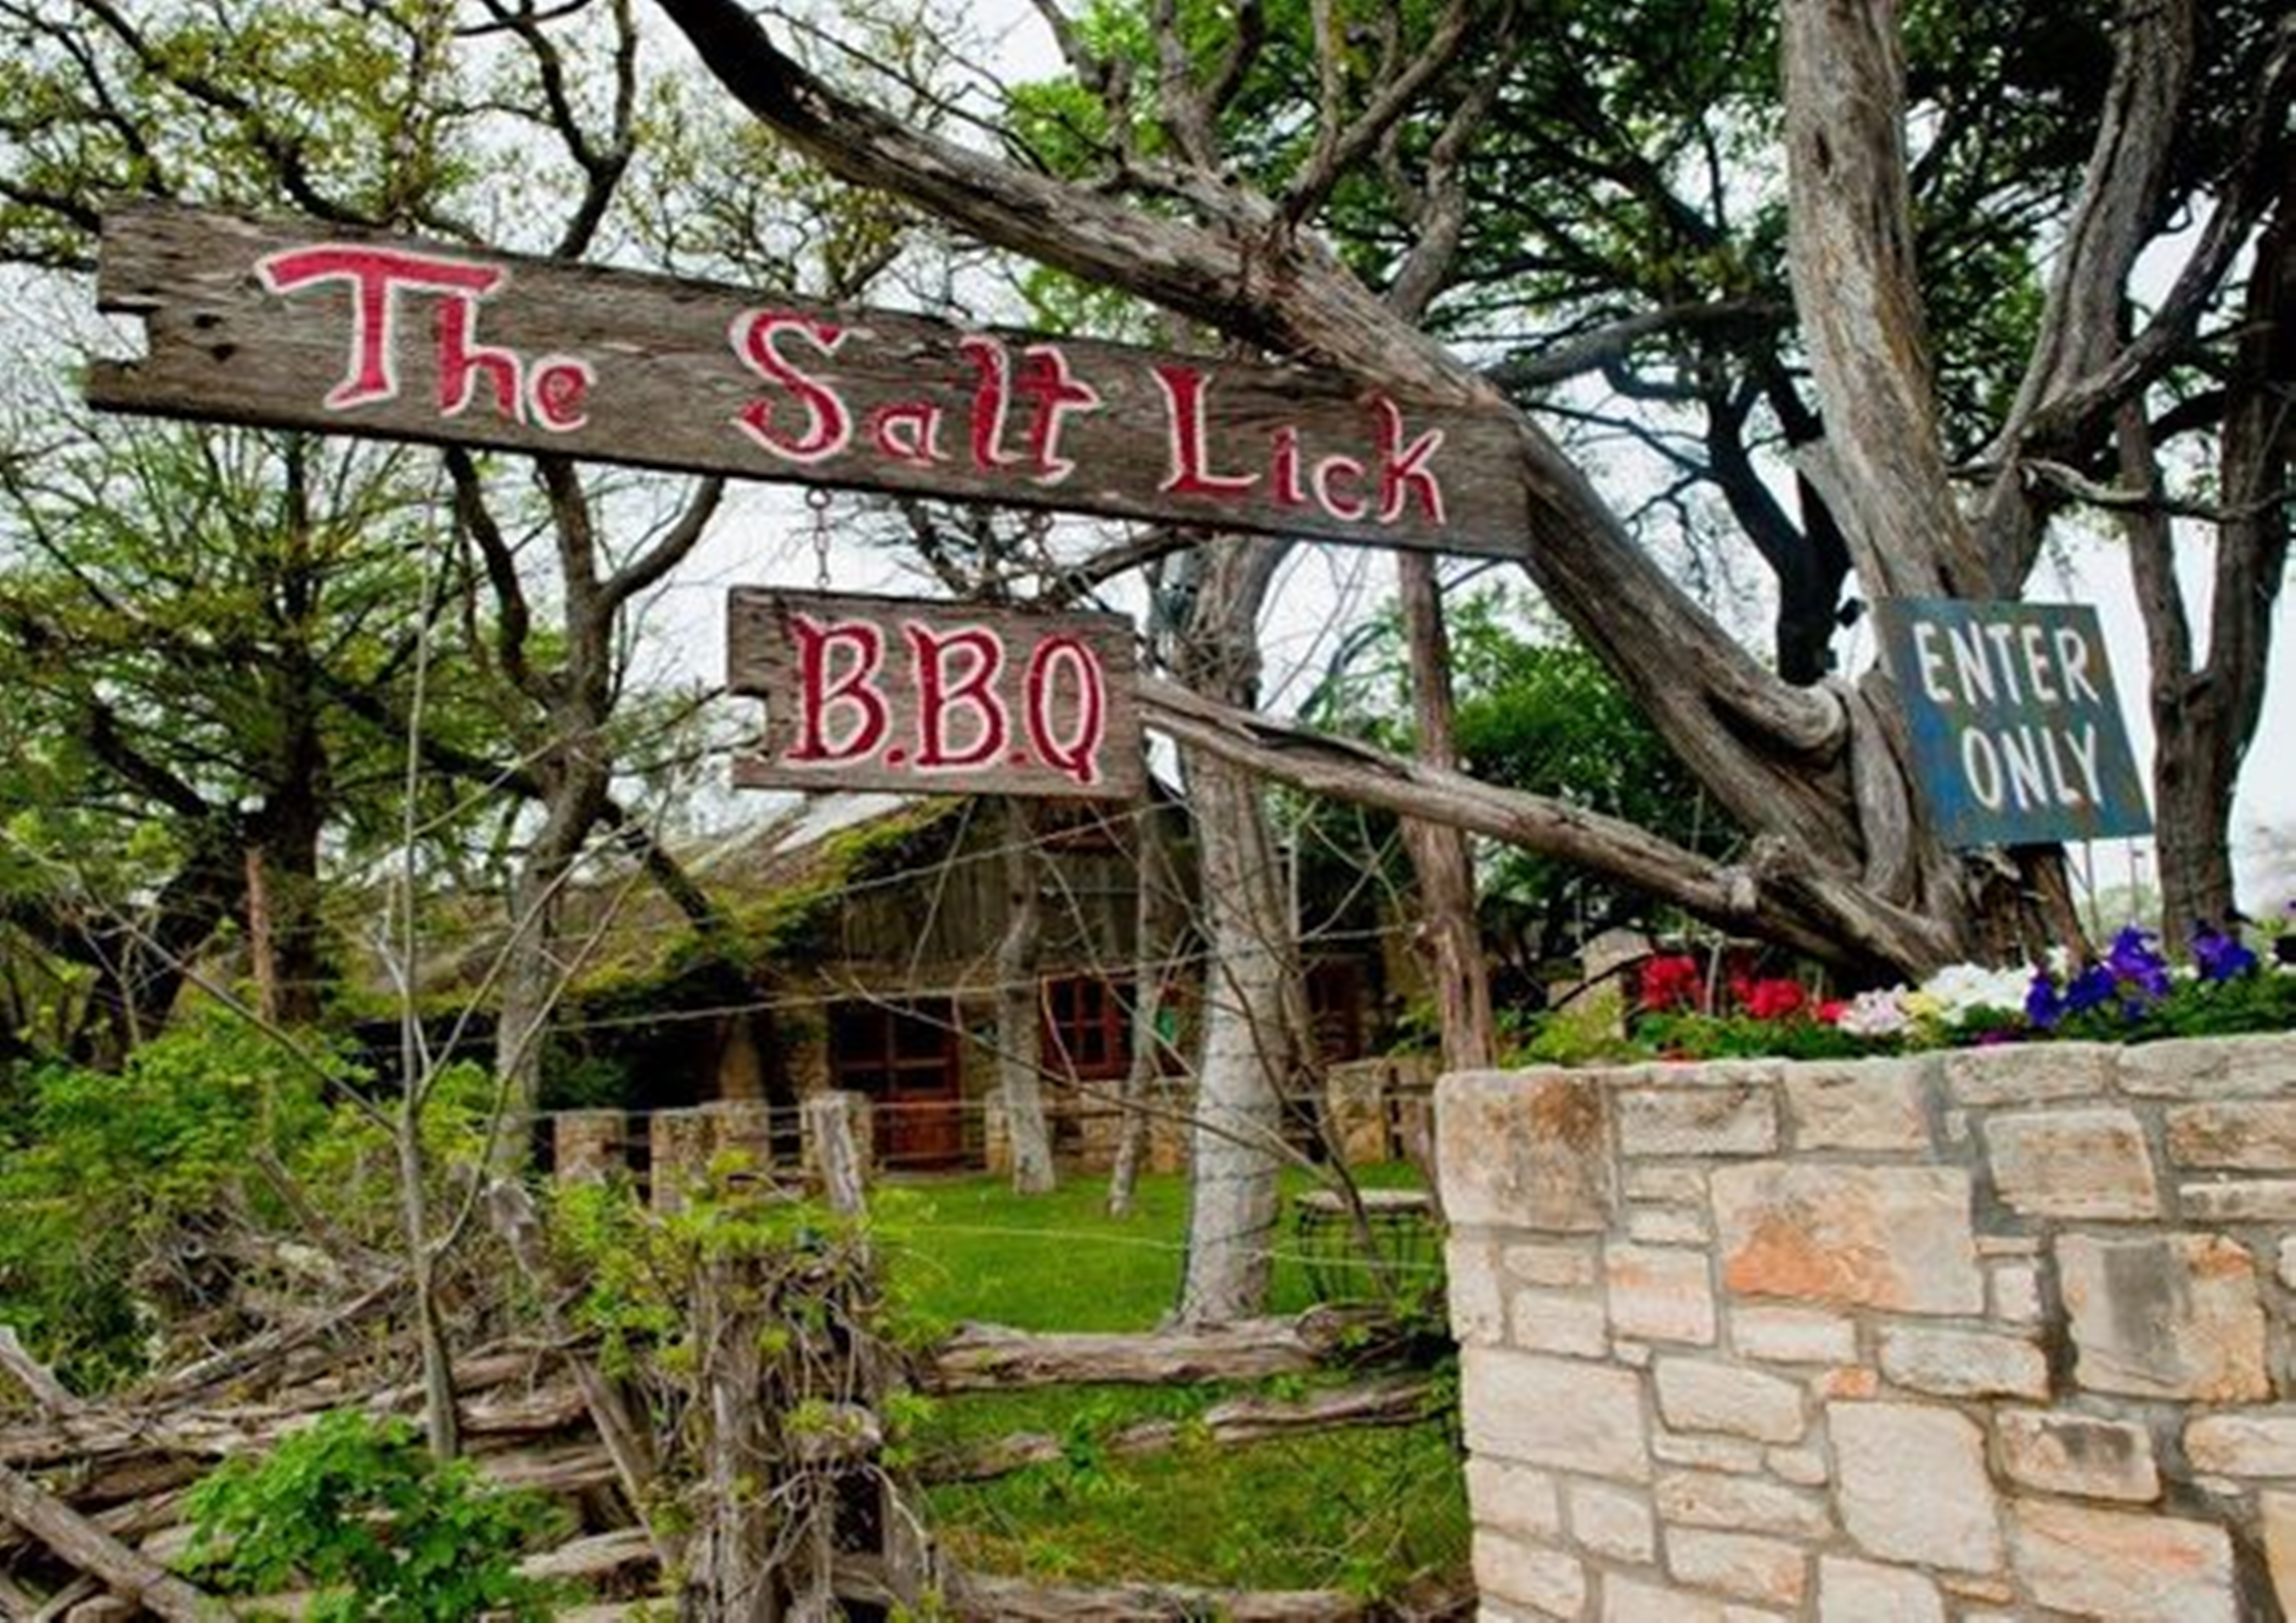 A view of the Salt Lick BBQ restaurant in Texas.